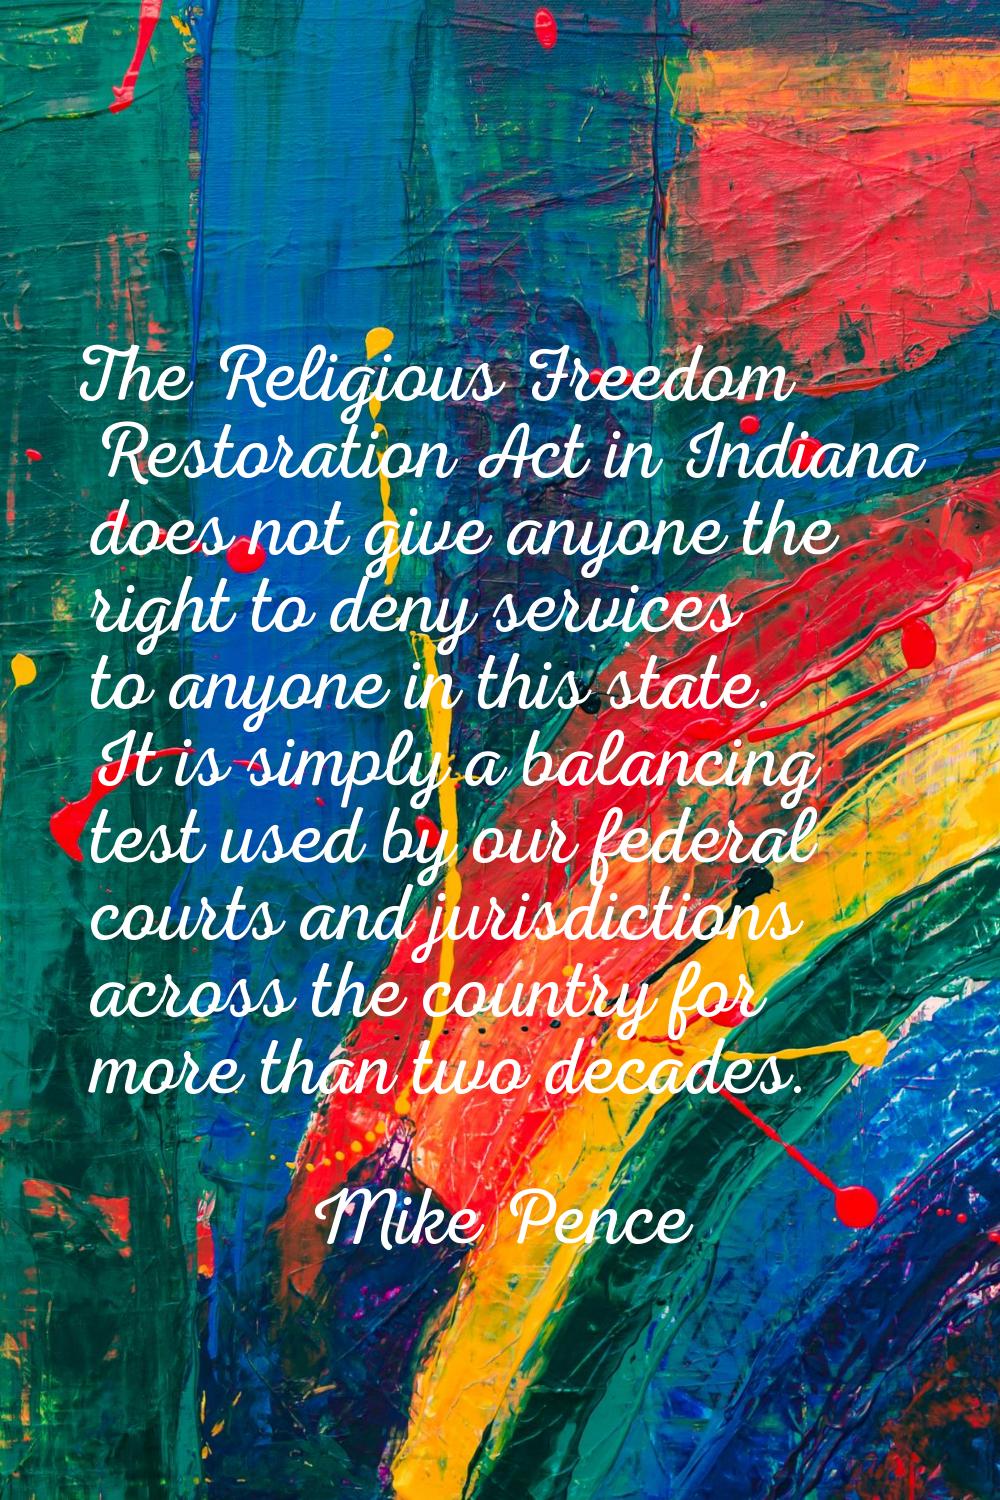 The Religious Freedom Restoration Act in Indiana does not give anyone the right to deny services to